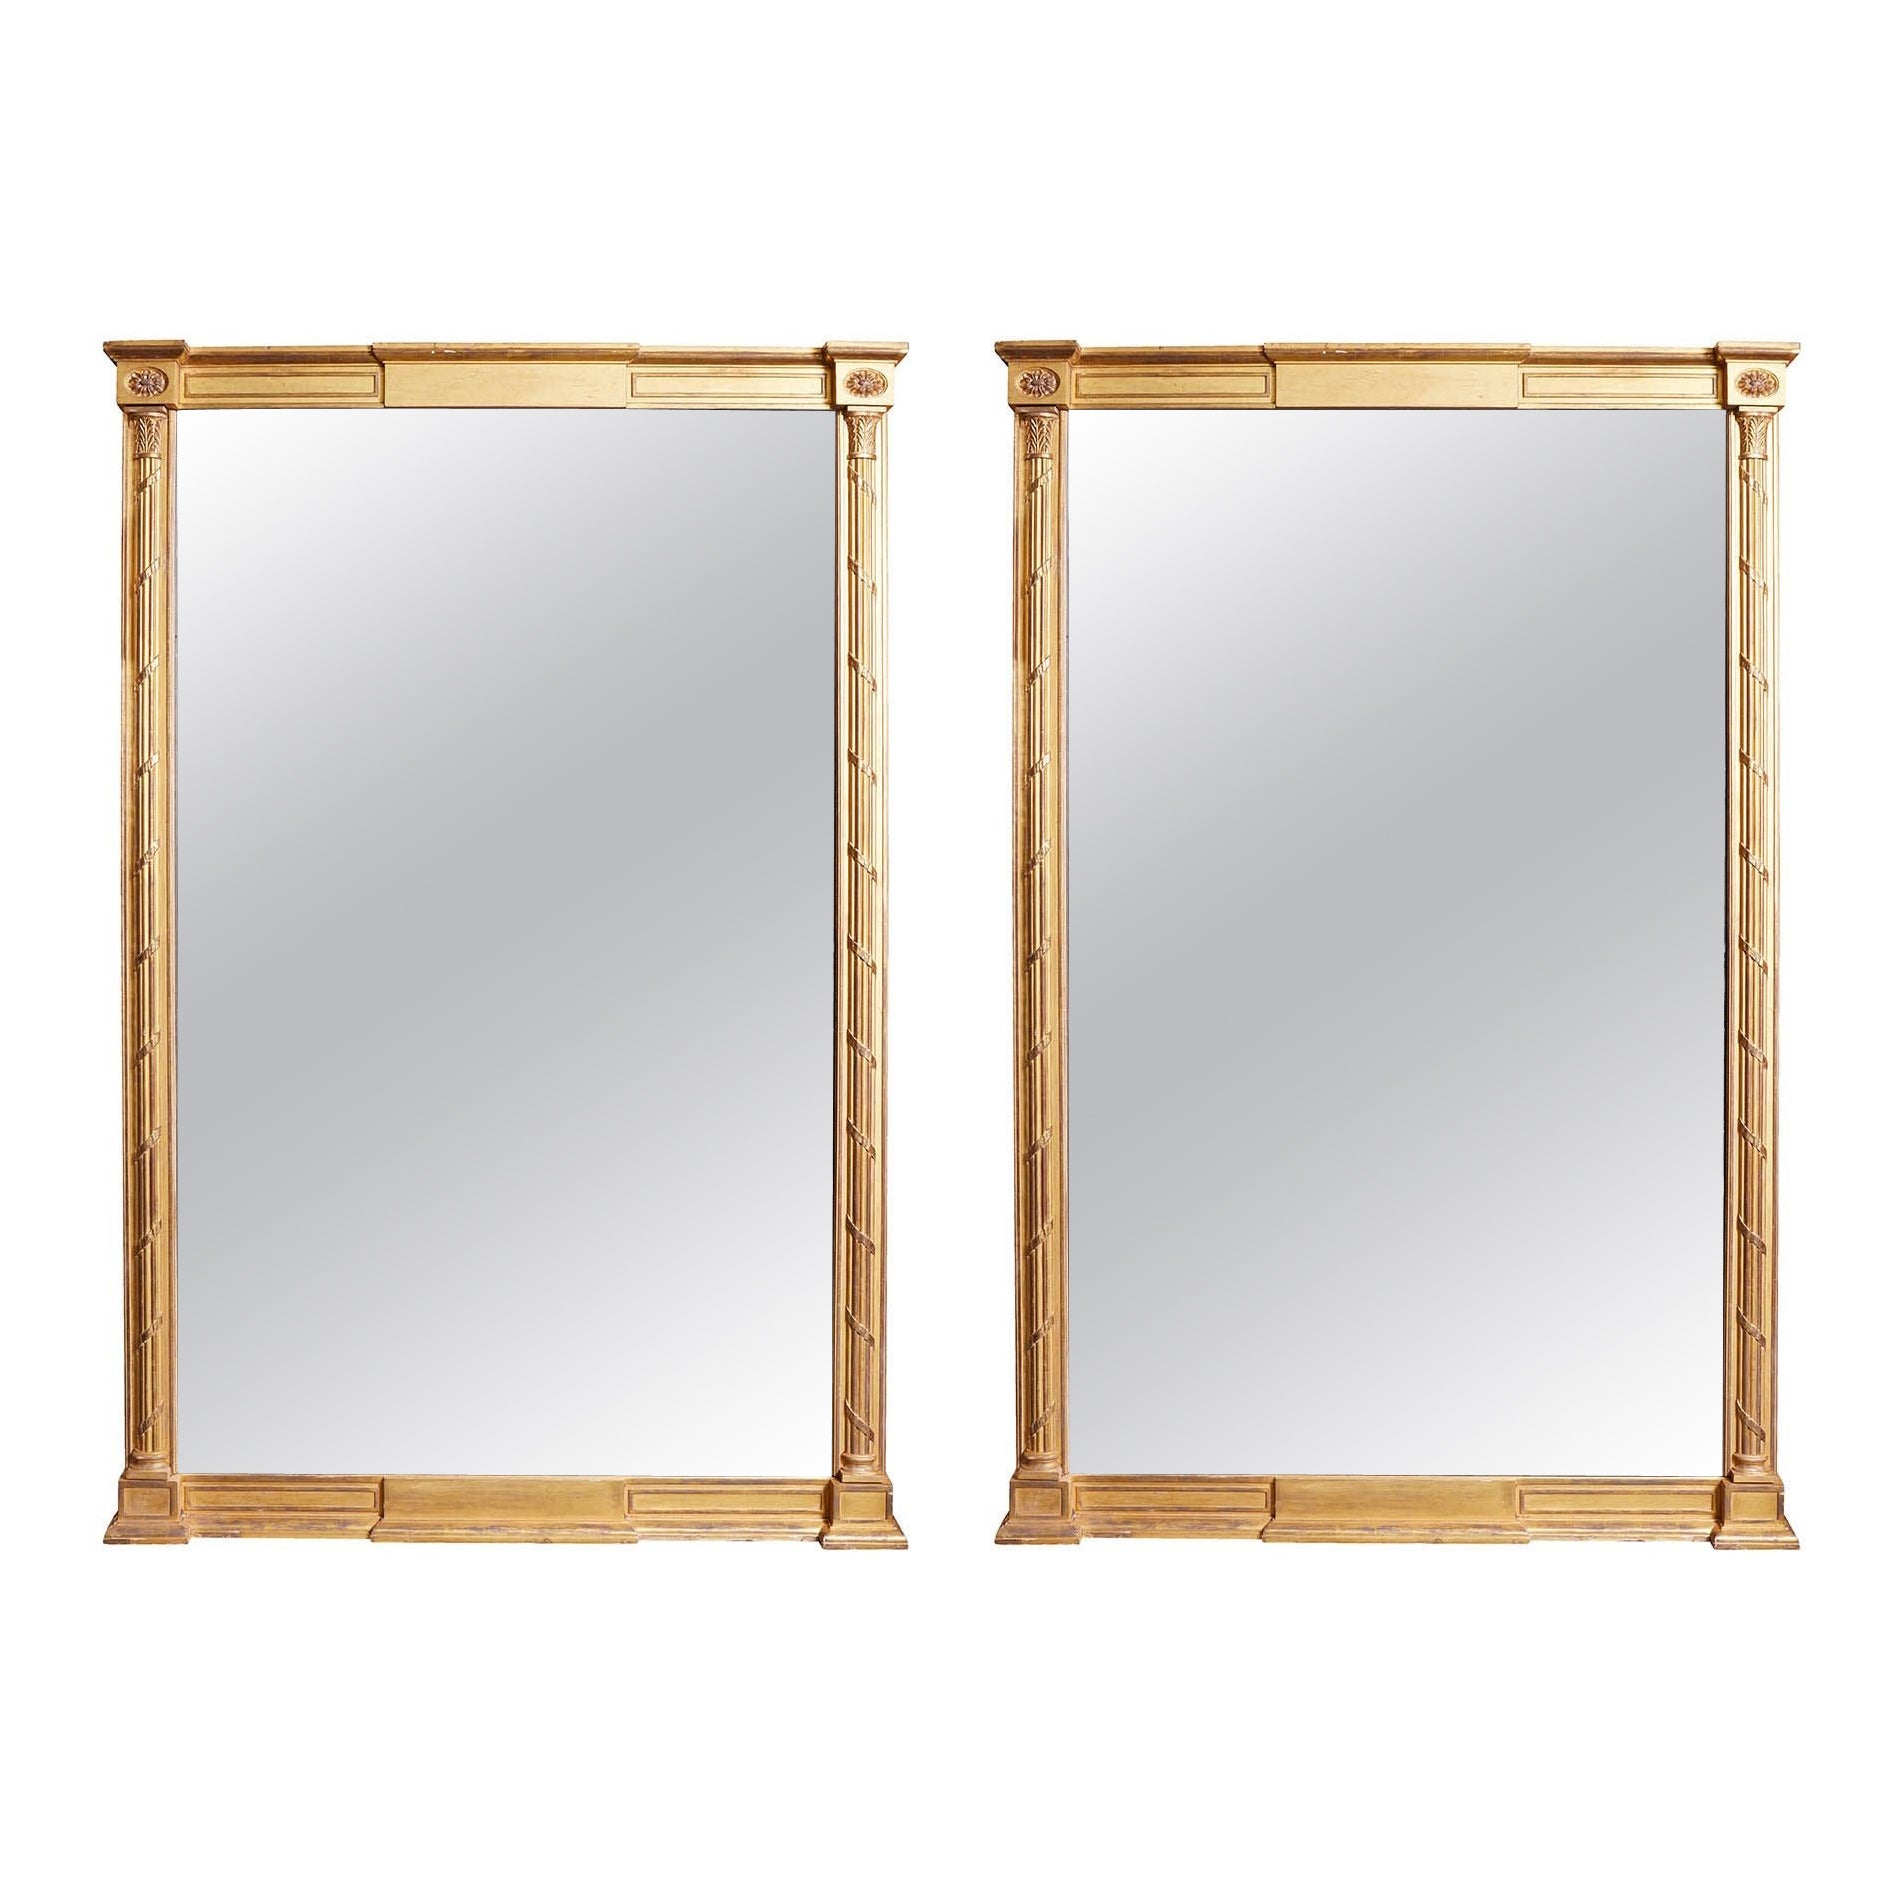 Pair of Substantial Georgian Giltwood Mirrors For Sale